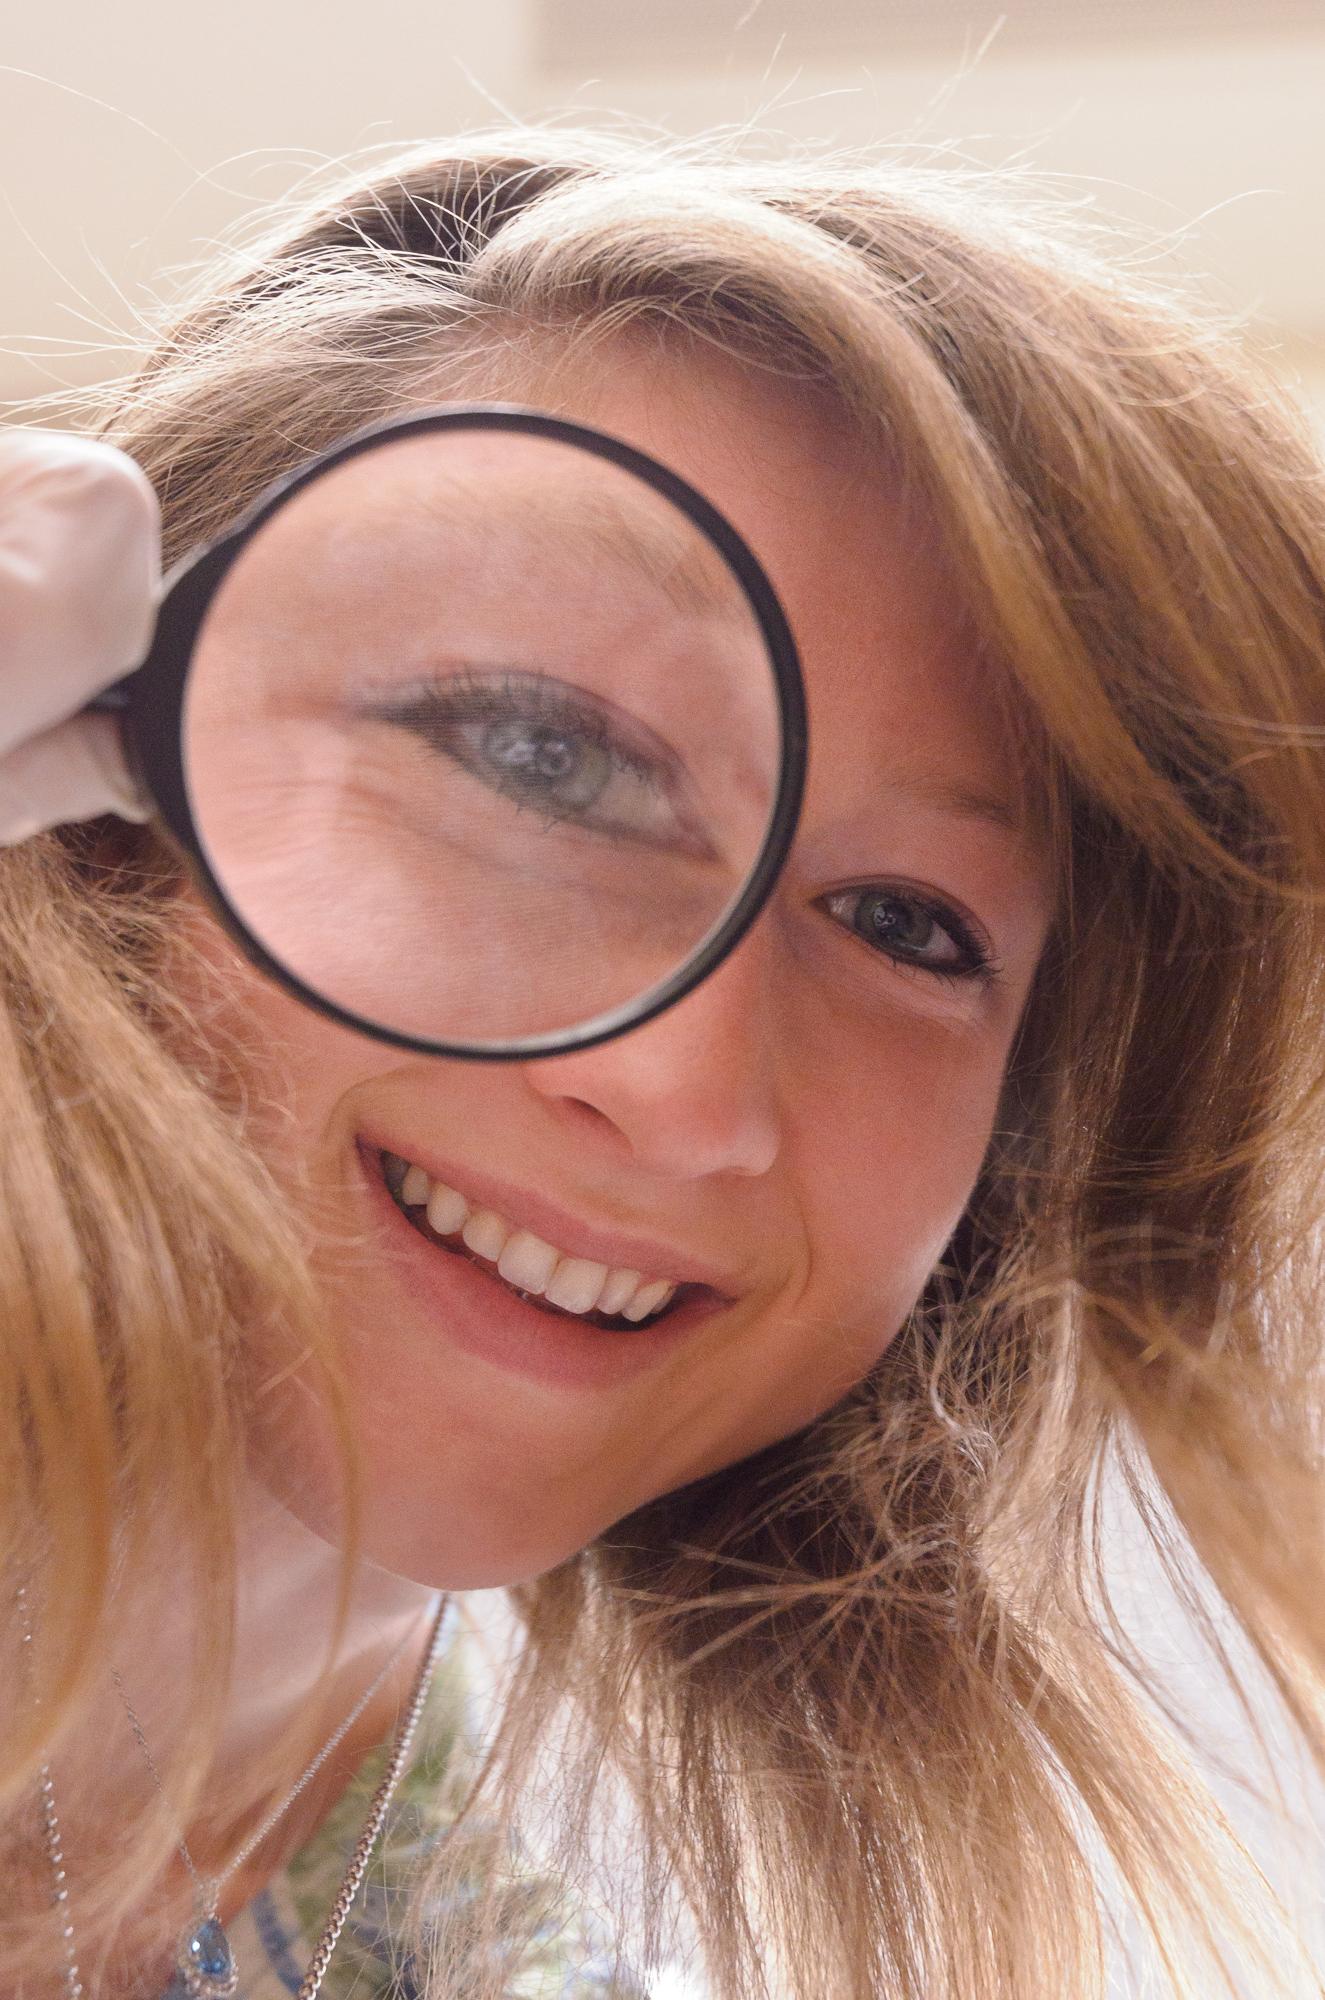 A student looking through a magnifying glass